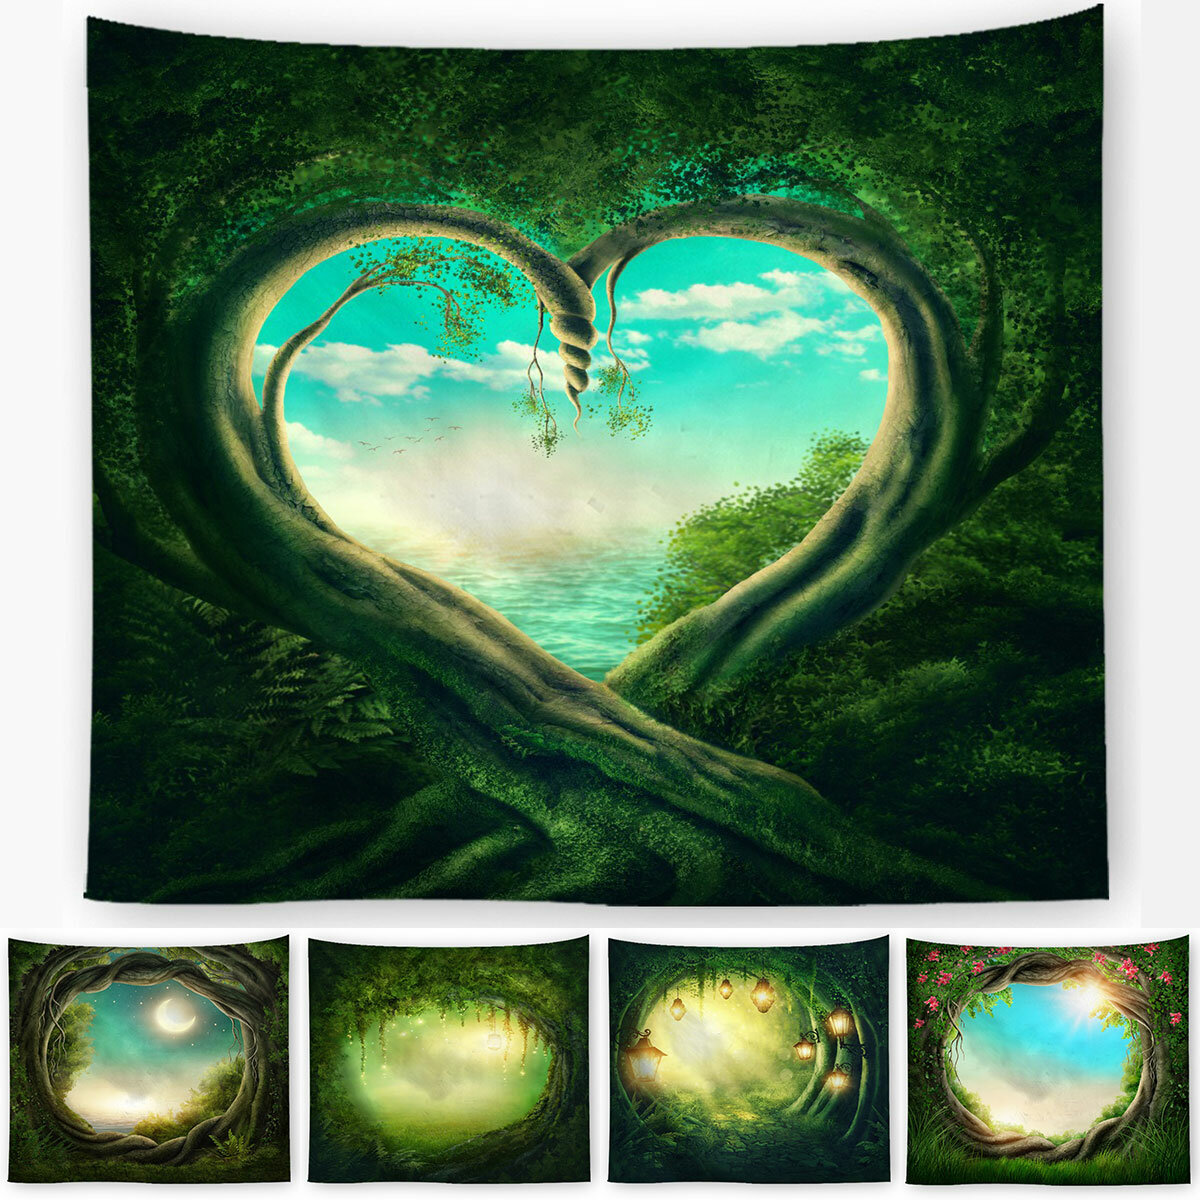 

Polyester Fancy Moon Light Tapestry Throw Mat Yoga Rug Wall Hanging Home Decor Art Crafts